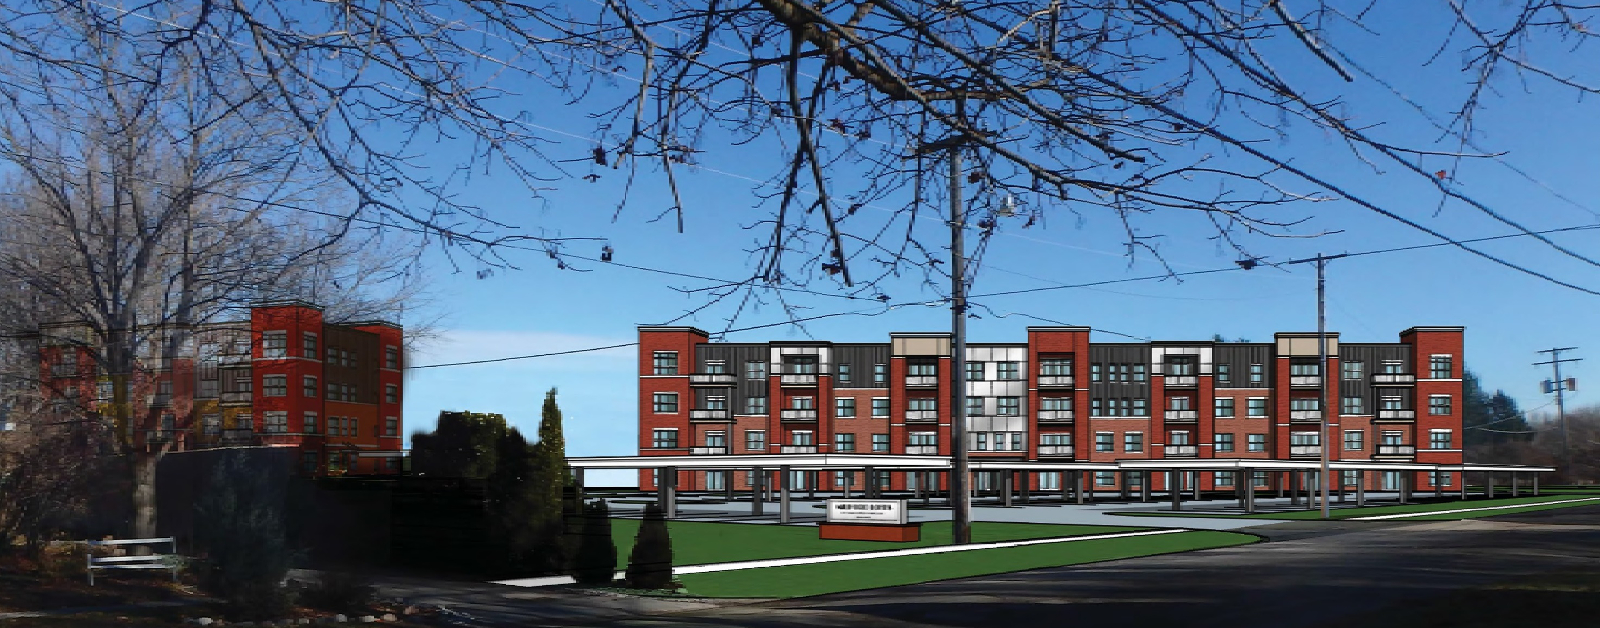 A rendering of the District Lofts in Milford